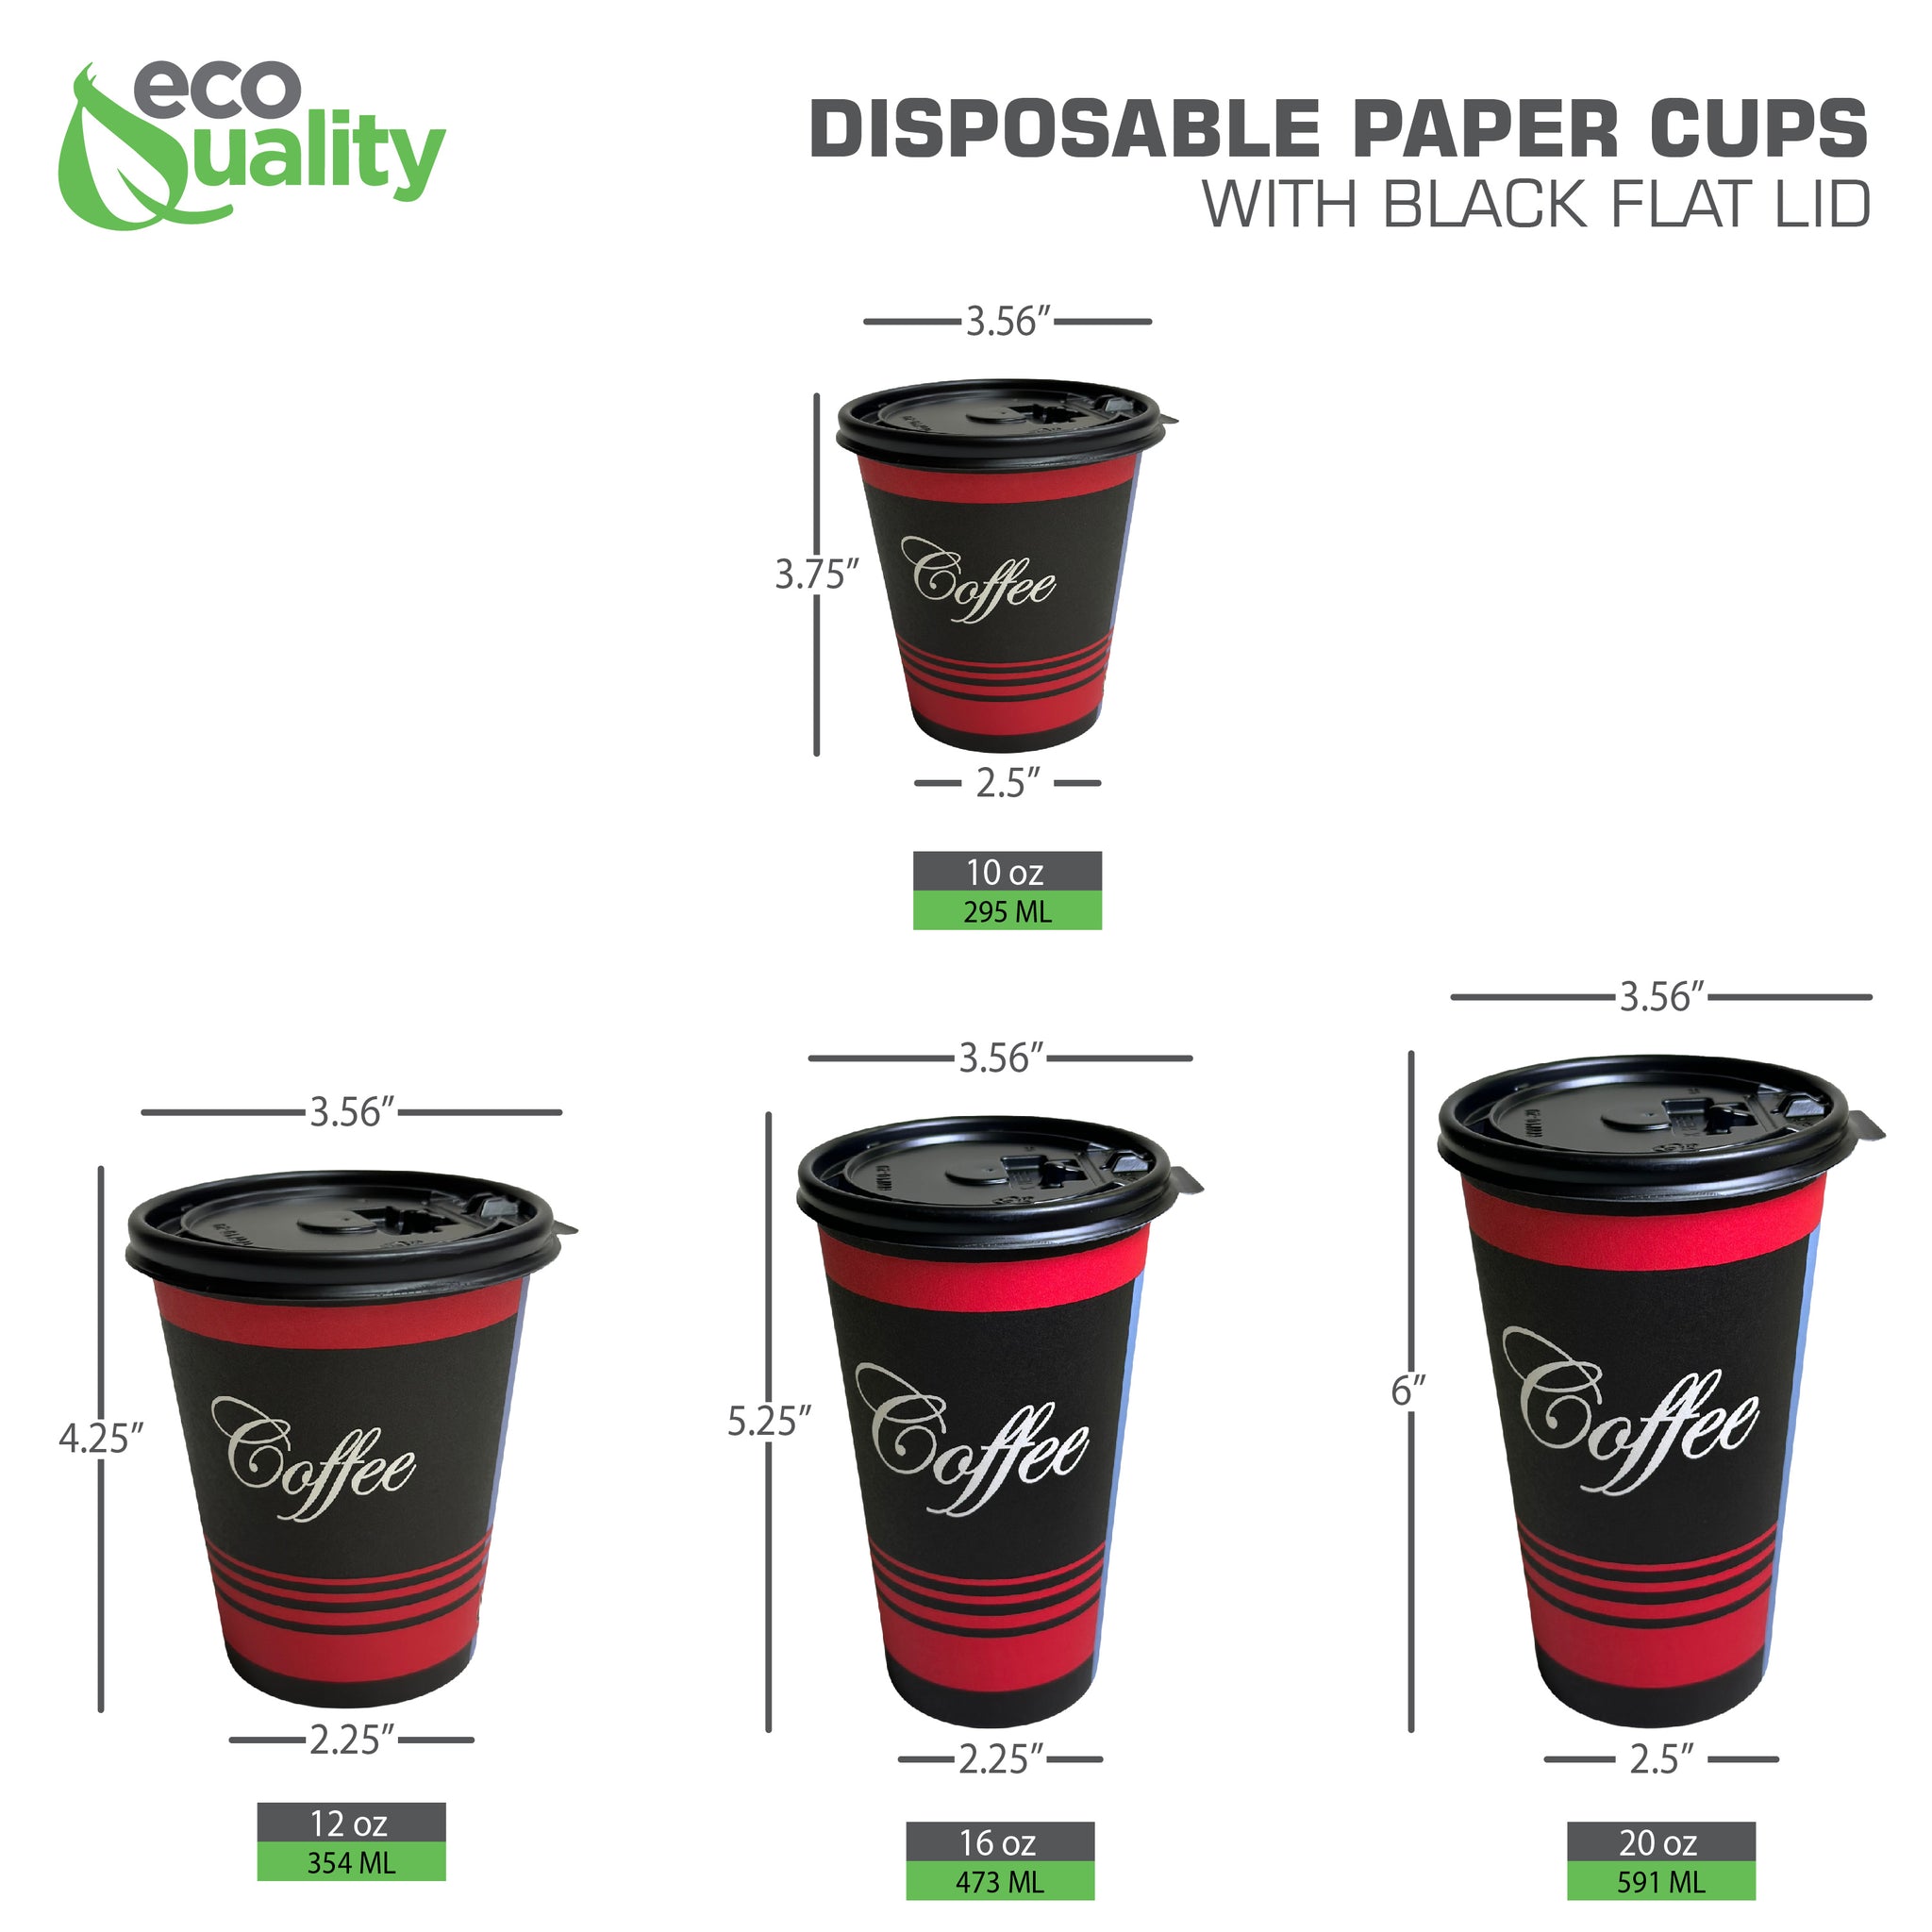 10oz Design Disposable Paper Coffee Cups with Black Flat Lids